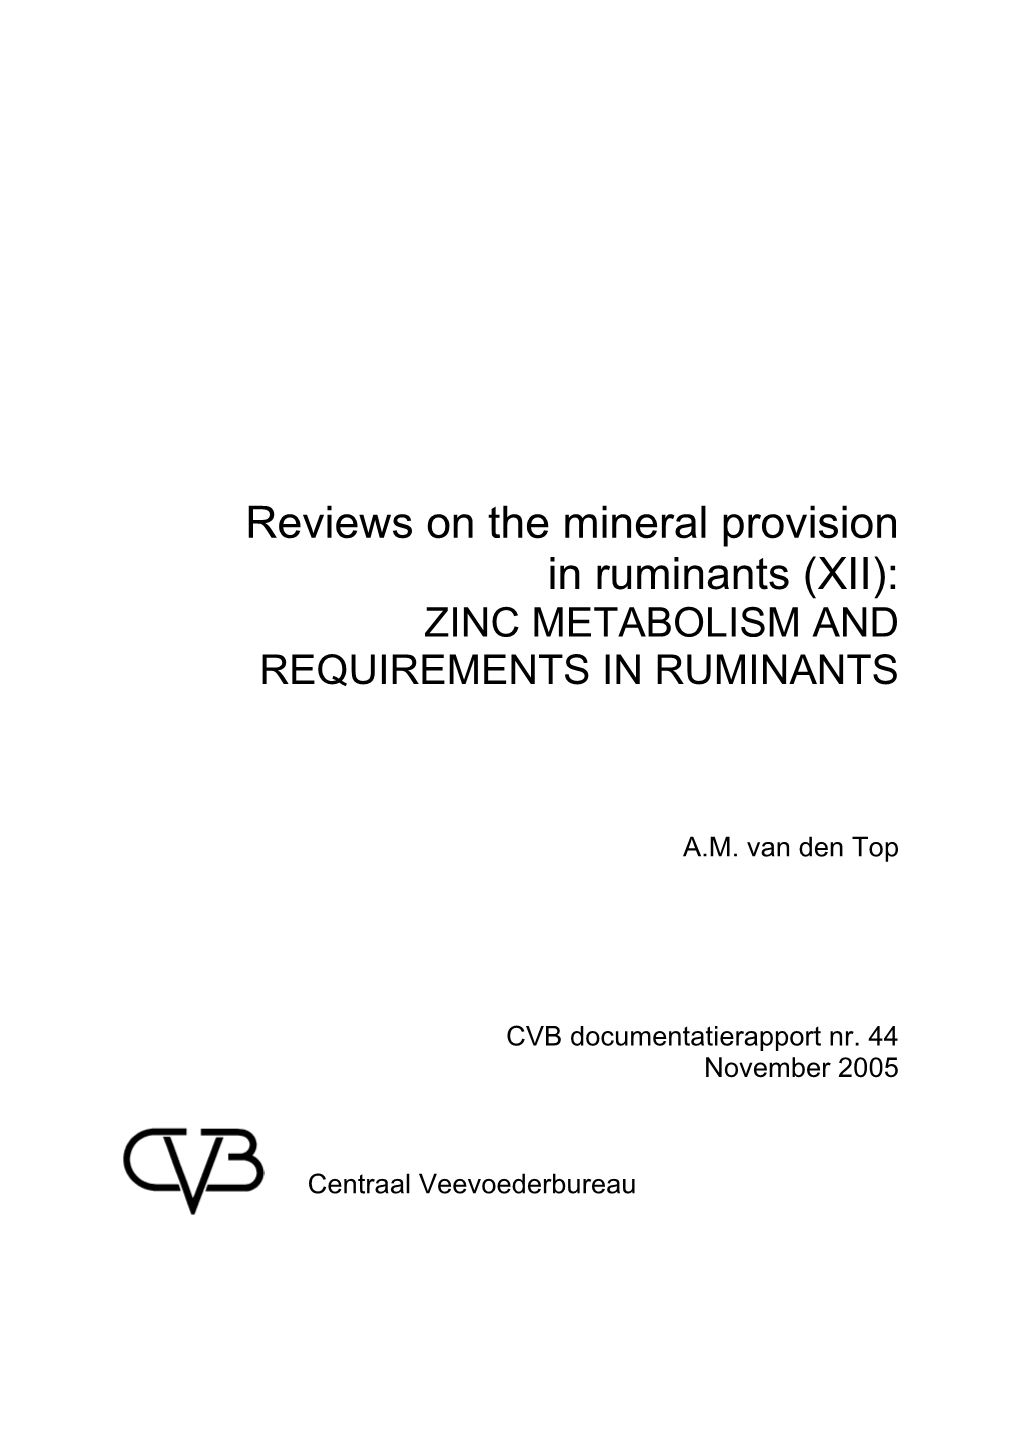 Reviews on the Mineral Provision in Ruminants (XII): ZINC METABOLISM and REQUIREMENTS in RUMINANTS